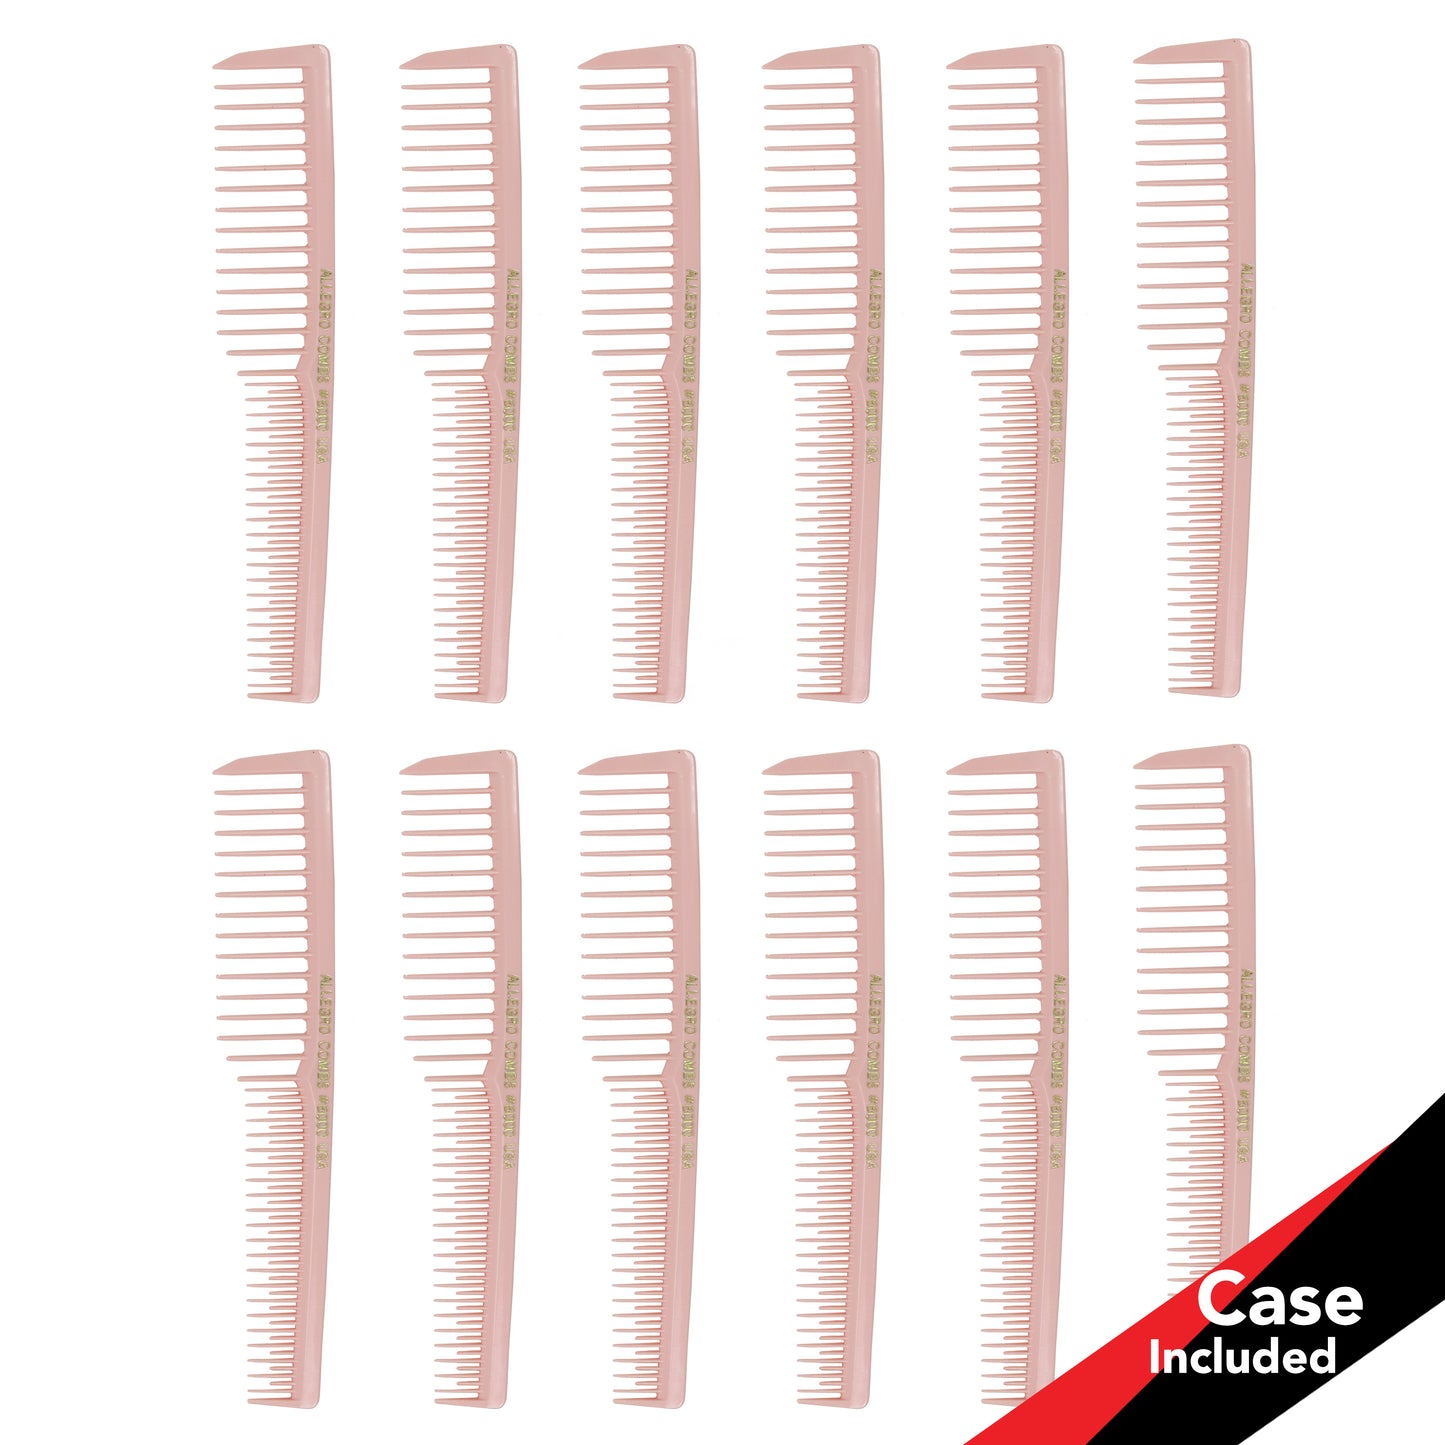 Allegro Combs 6000 Wide Tooth Teasing Lift Vented Hair Combs Space Tooth Barber Stylist Curly Hair Parting 12 Pc.